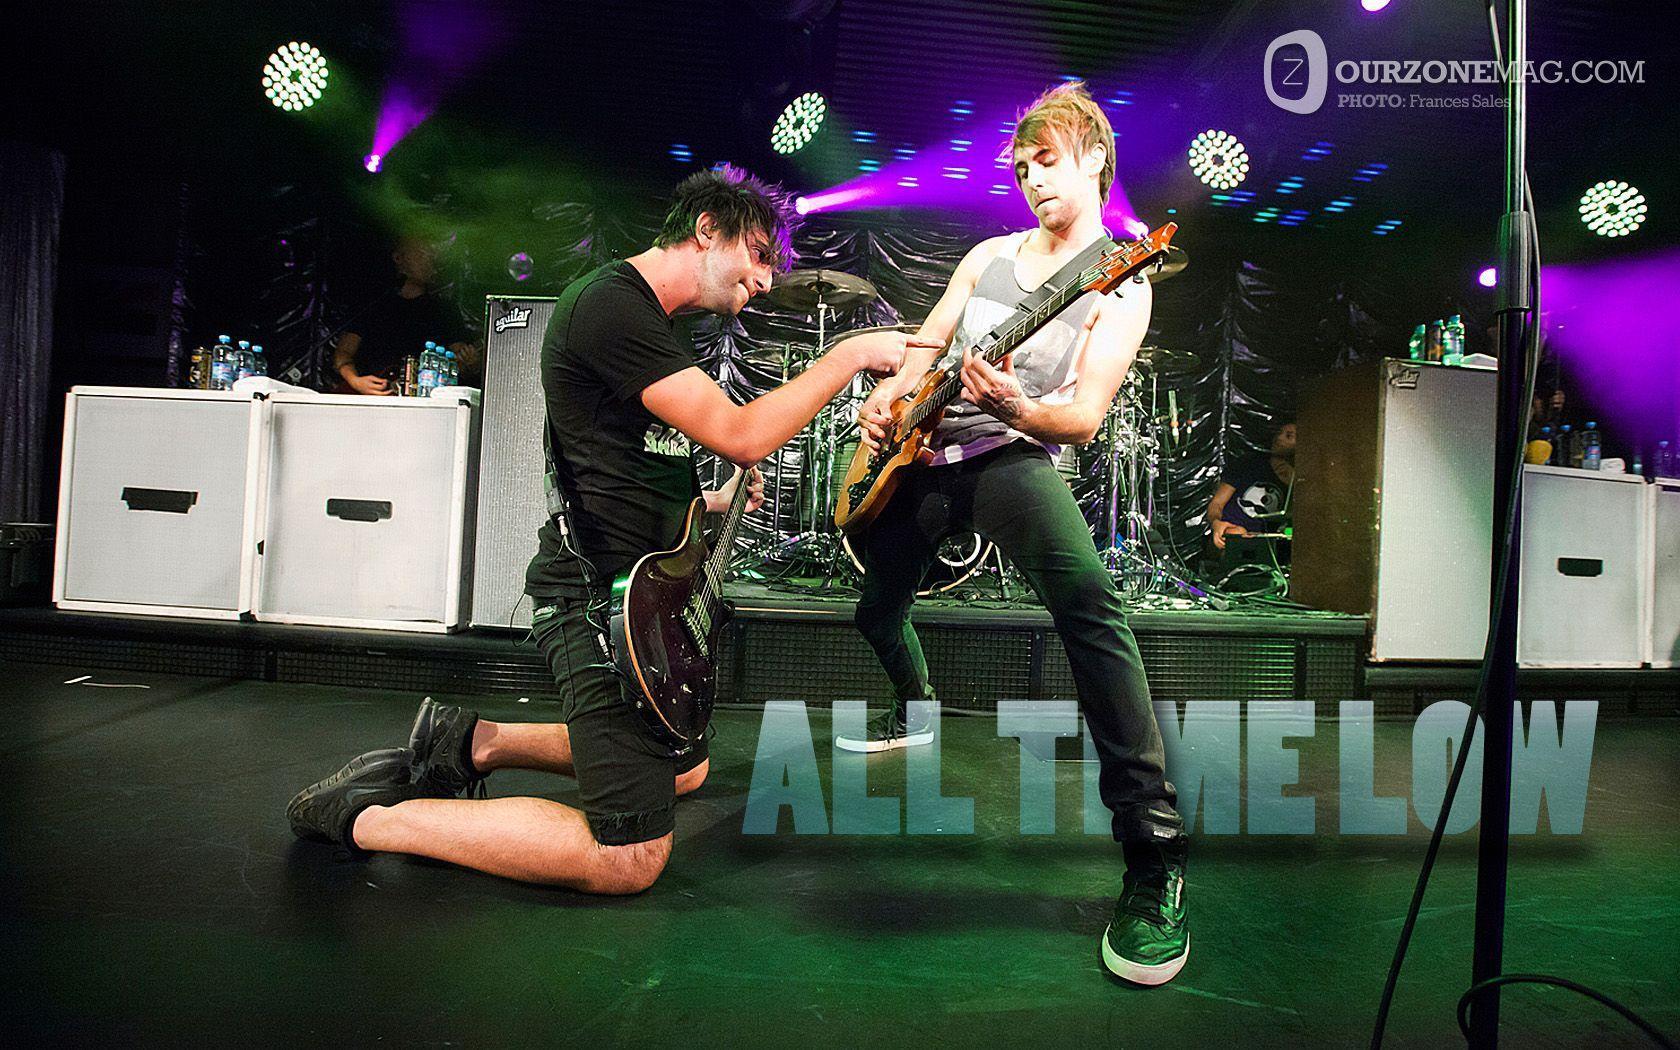 FREE DOWNLOAD: All Time Low Wallpaper